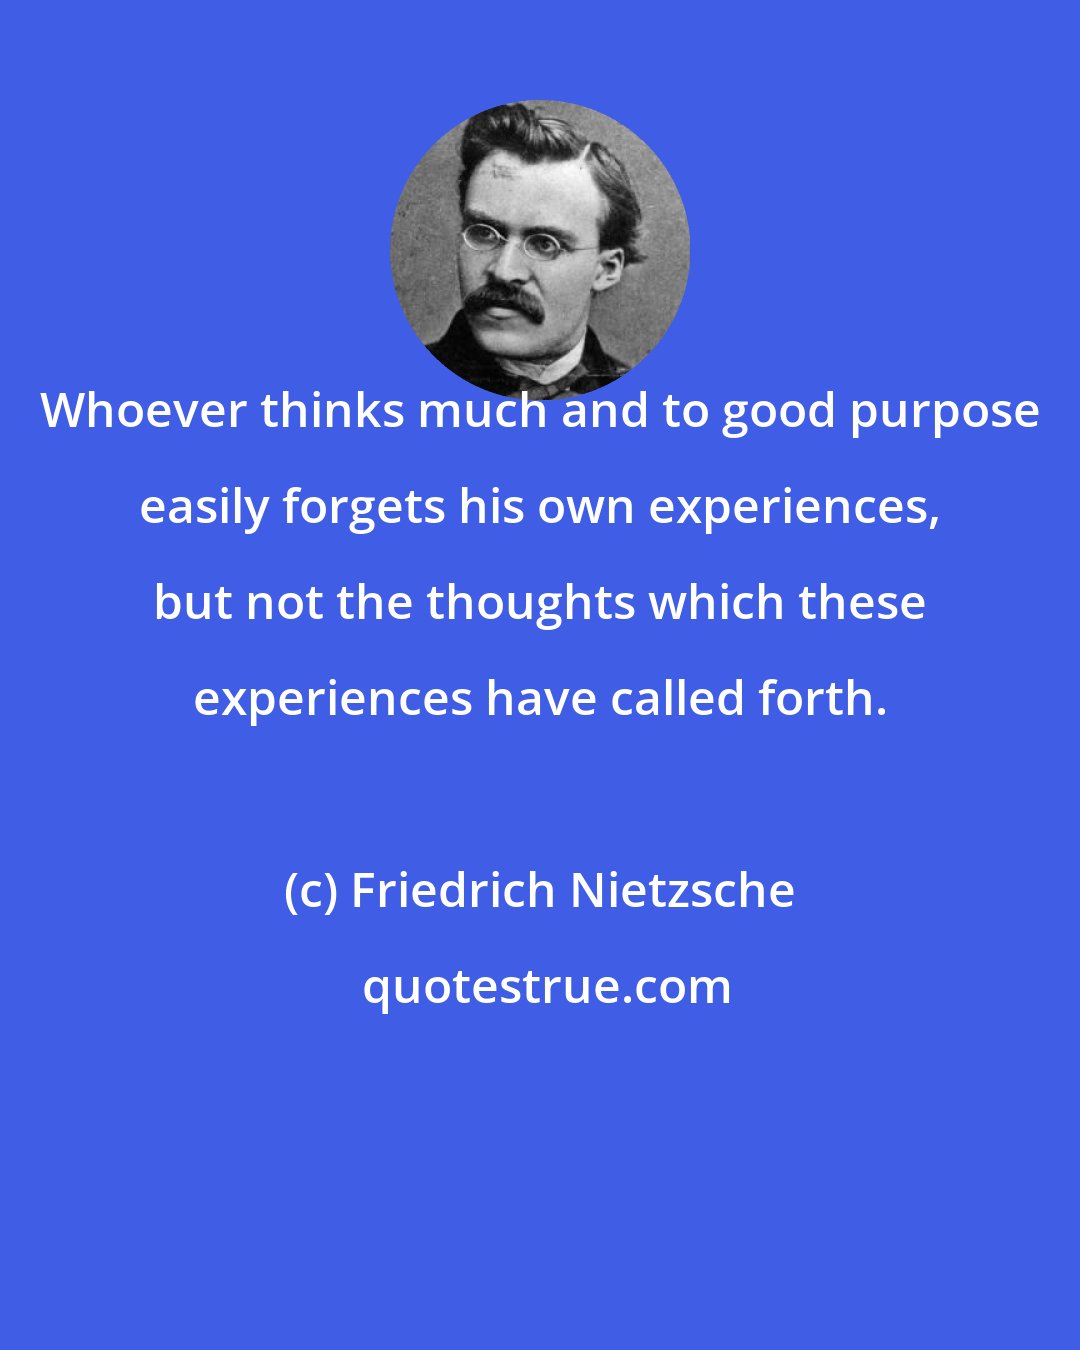 Friedrich Nietzsche: Whoever thinks much and to good purpose easily forgets his own experiences, but not the thoughts which these experiences have called forth.